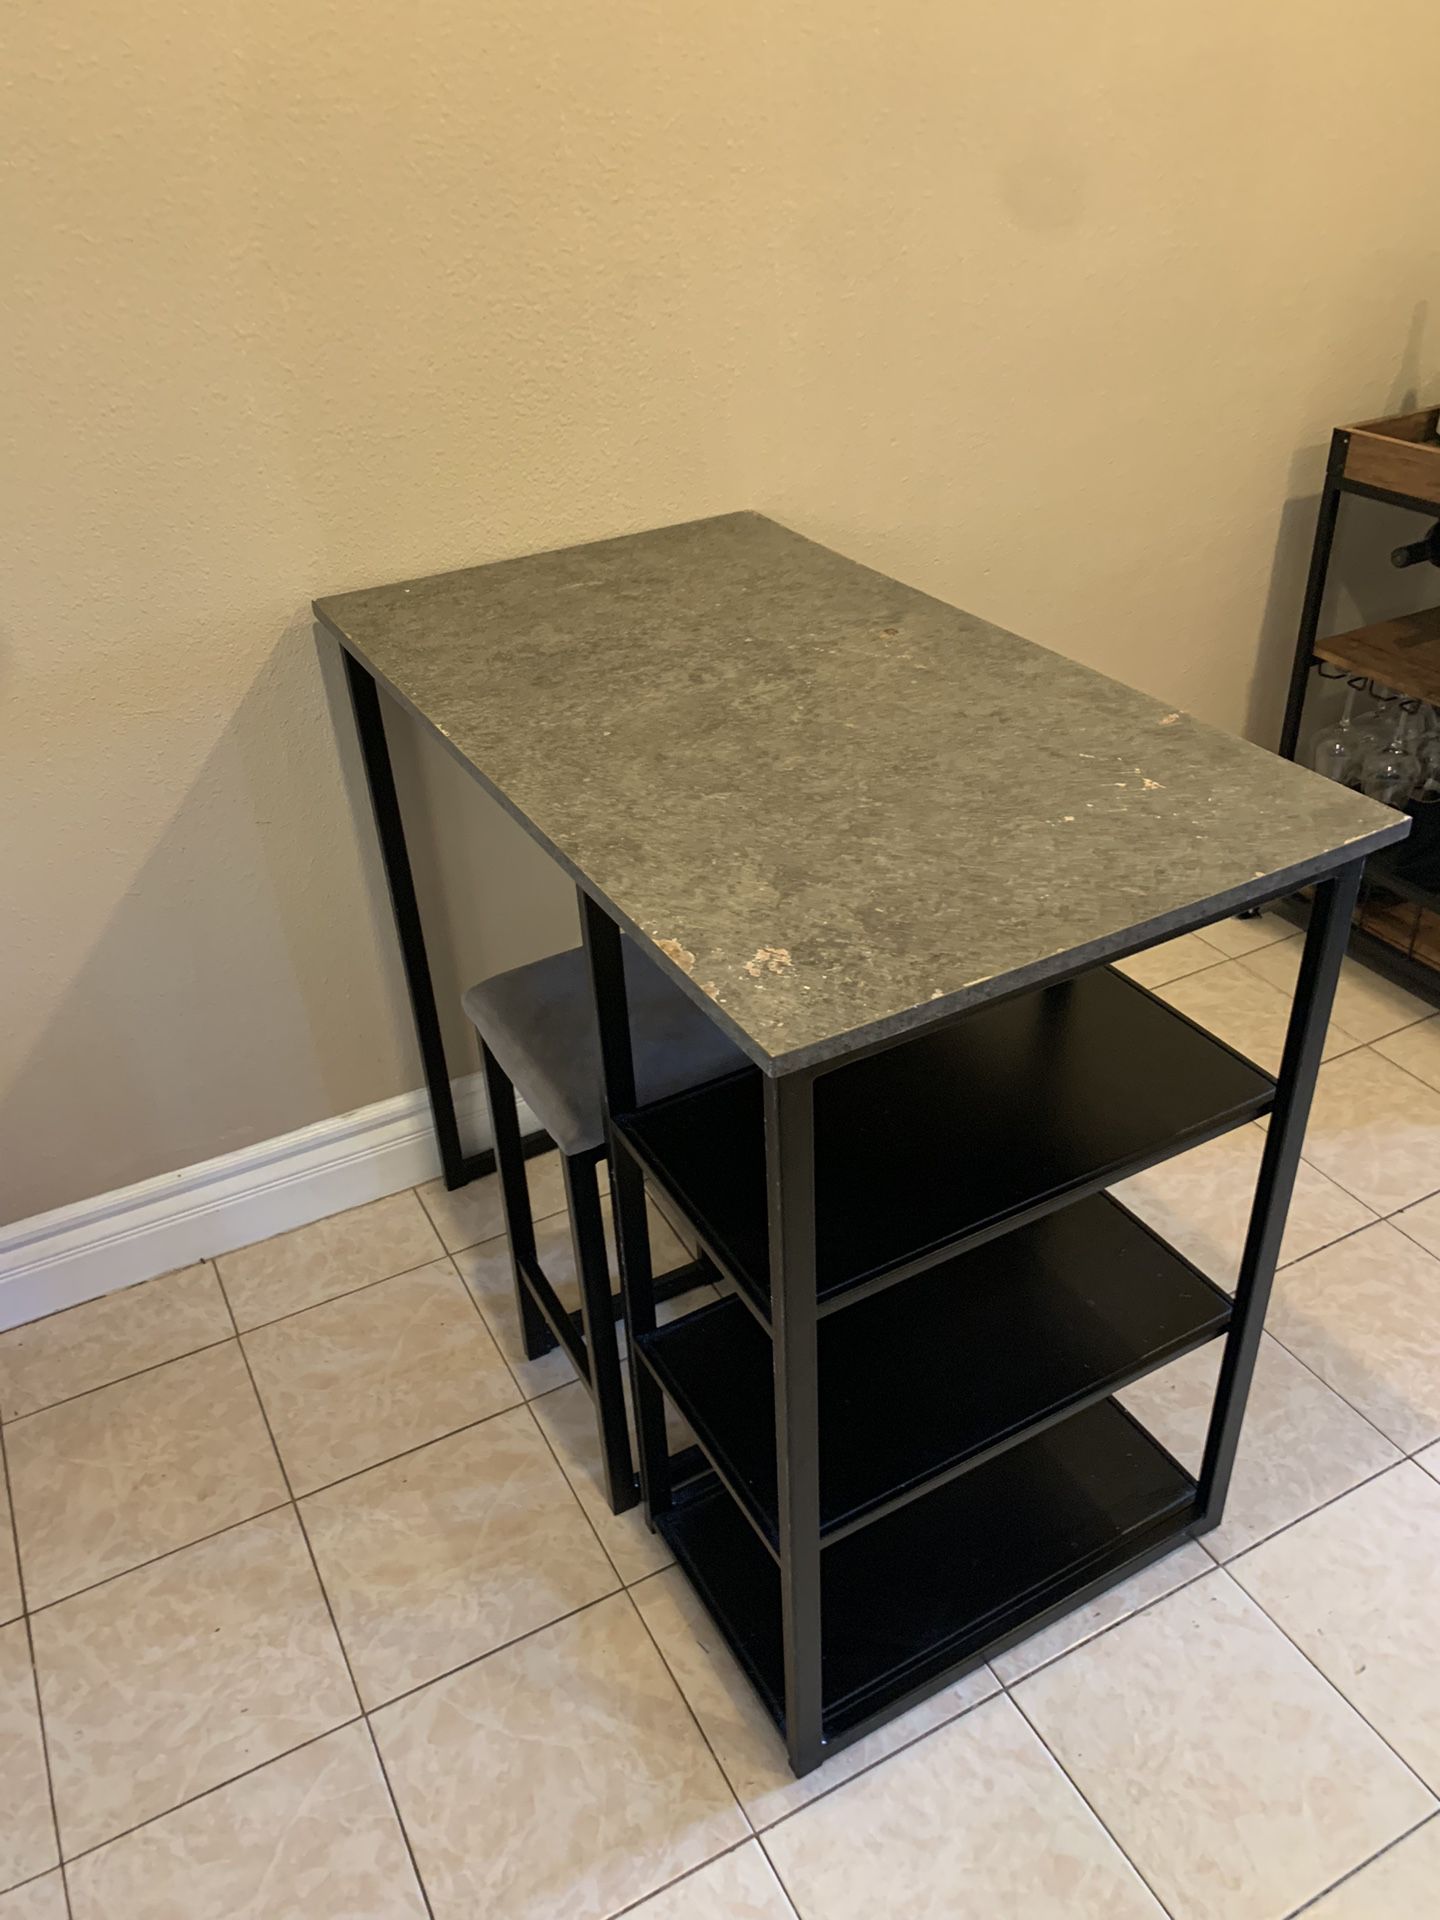 Dining Room High Top Table (2 Stools Included